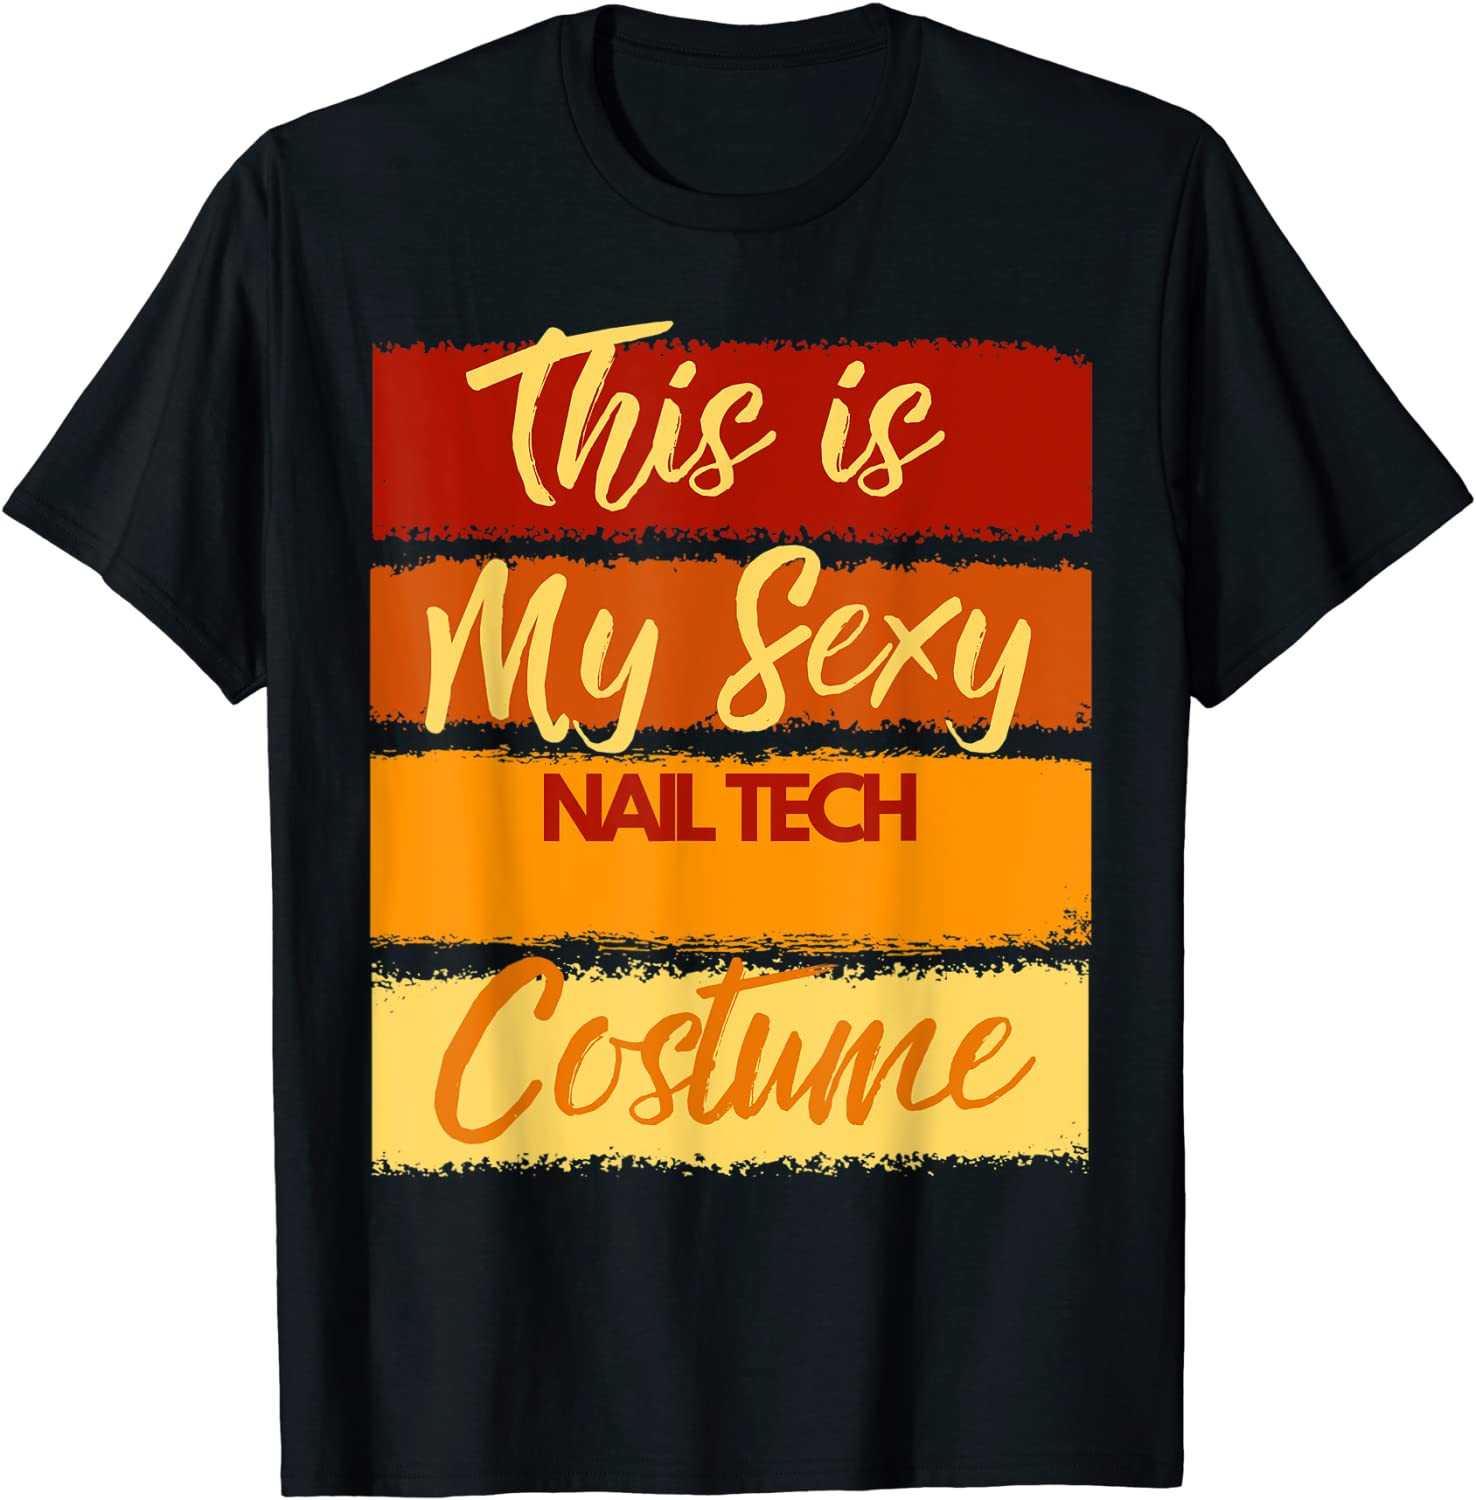 This Is My Sexy Nail Tech Costume Halloween Party T-Shirt